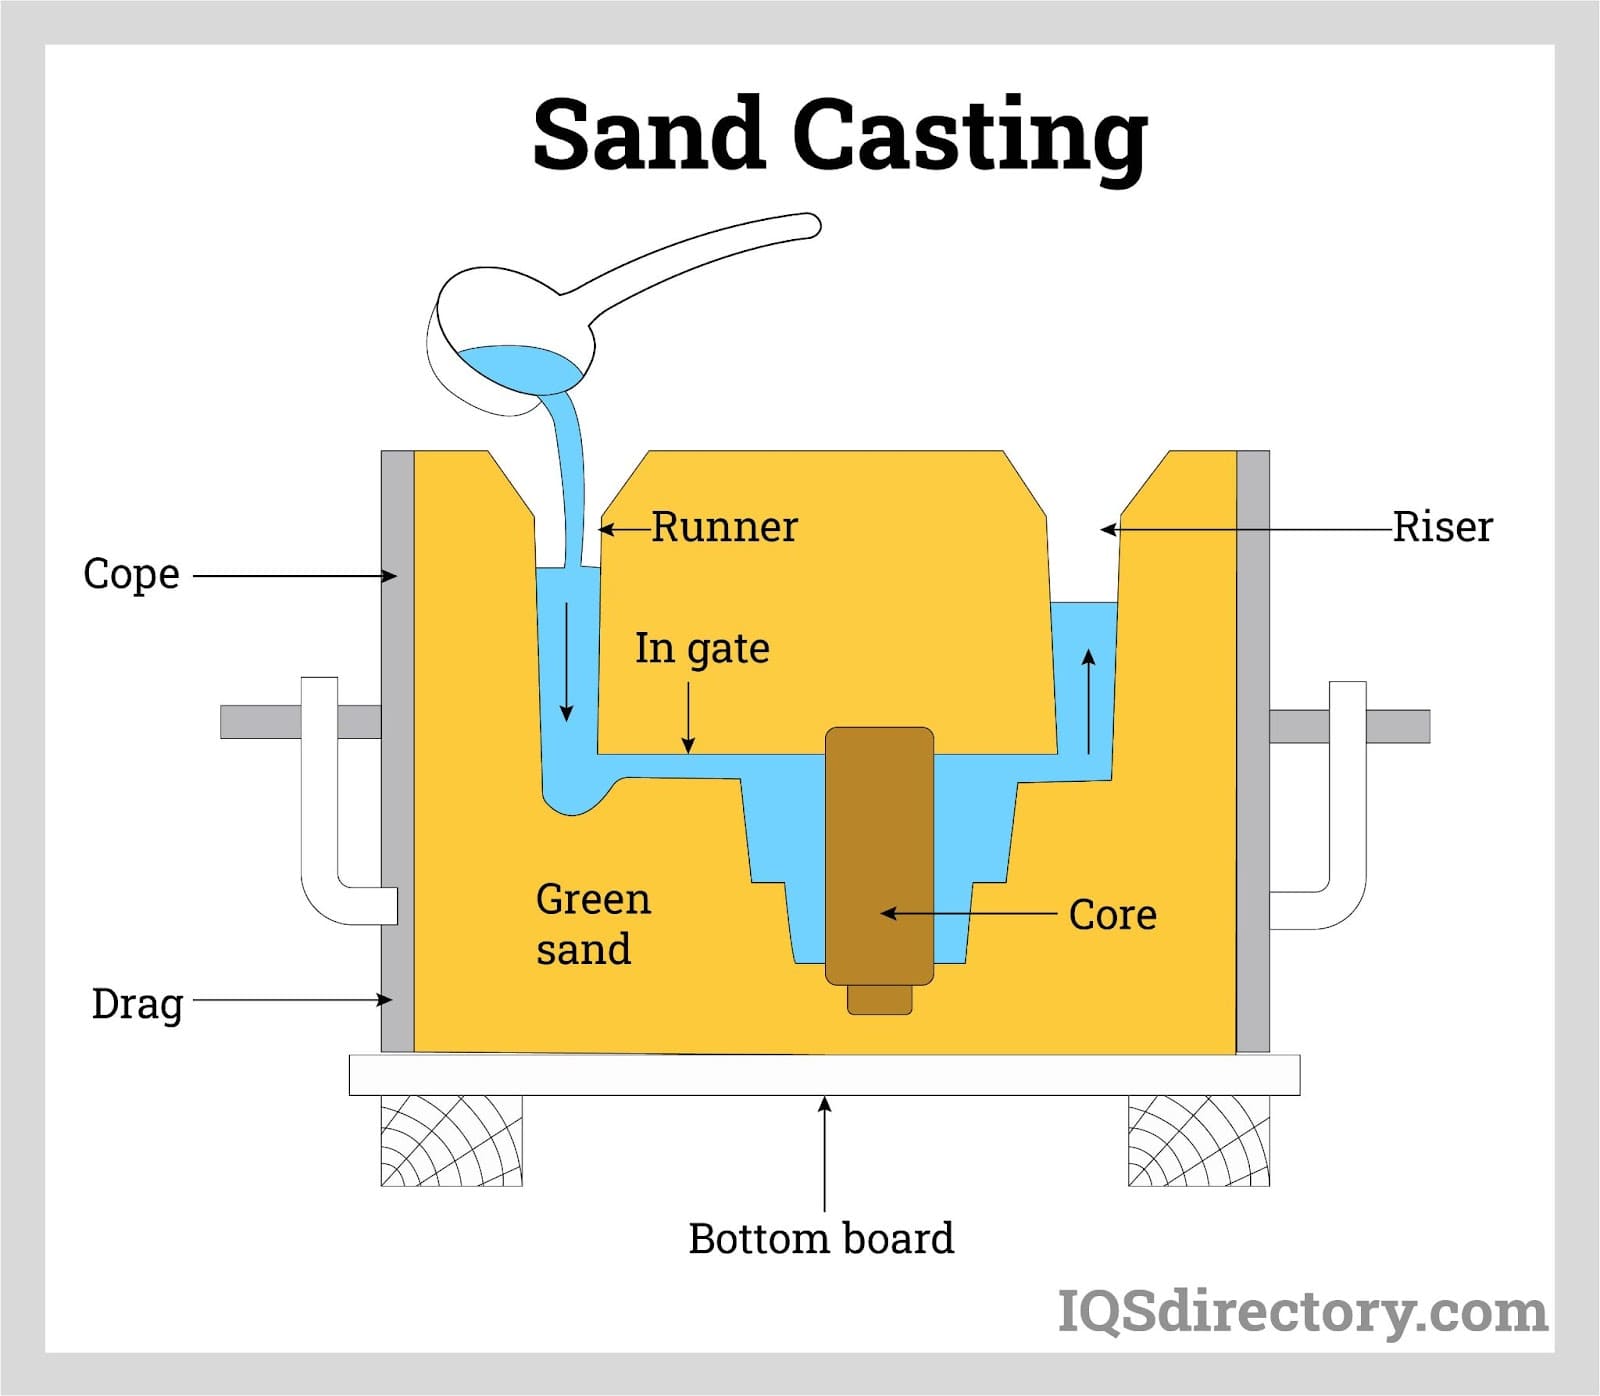 Aluminium Casting Product by Sand Casting, Steel Casting Factory